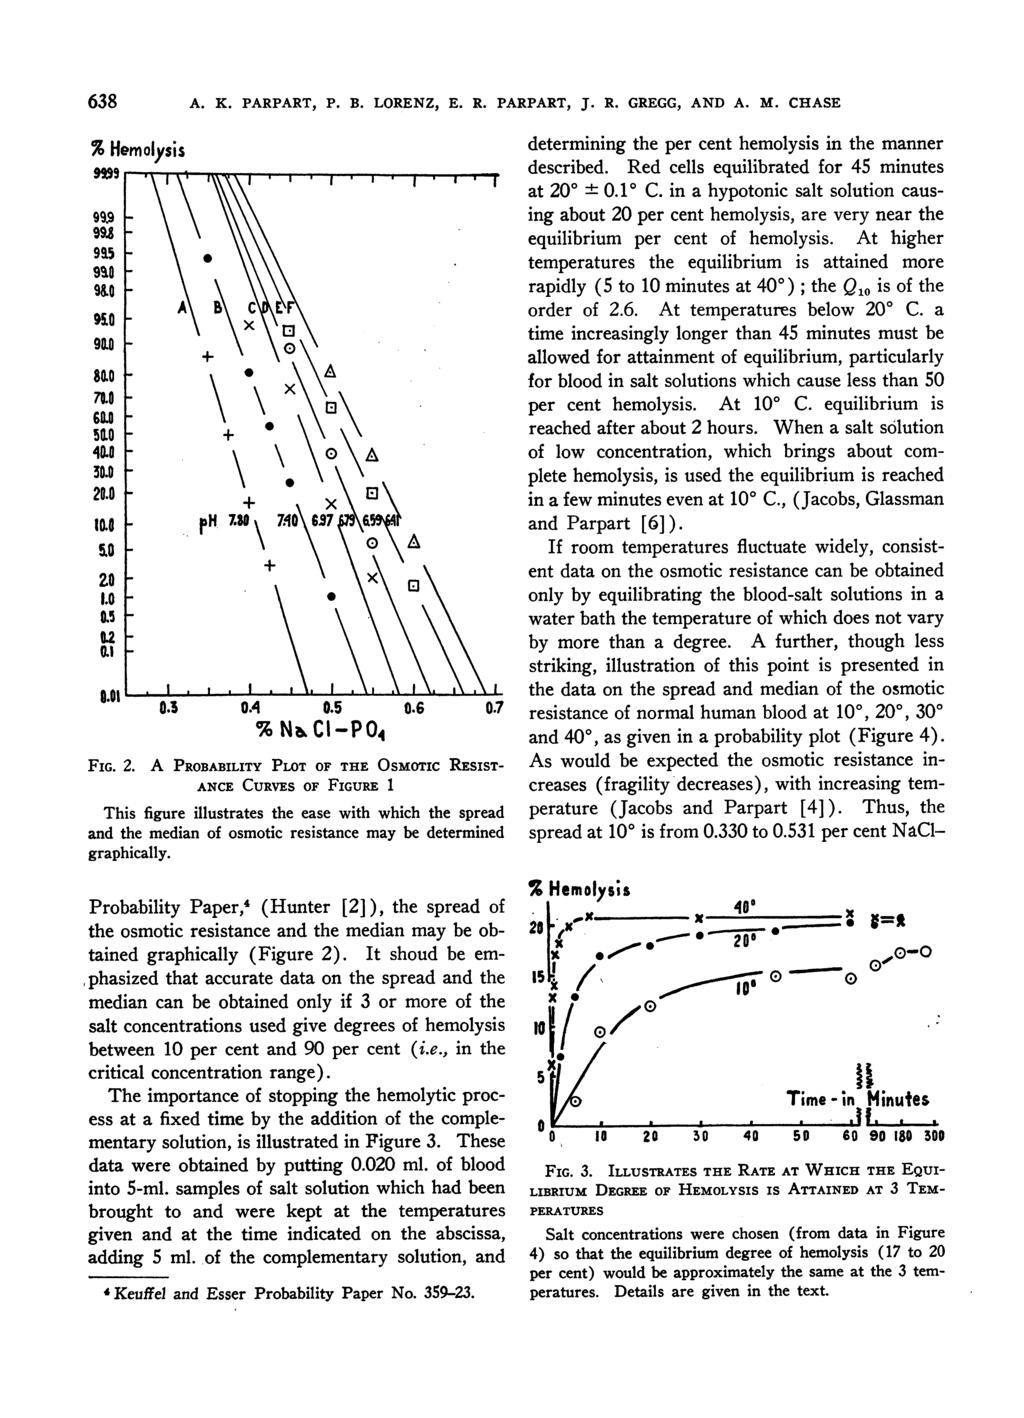 638 % Hemolysis 99I99 x I ki 9-we A. K. PARPART, P. B. LORENZ, E. R. PARPART, J. R. GREGG, AND A. M. CHASE 0.3 0.4 0.5 0.6 0.7 % N CI-PO4 FIG. 2.